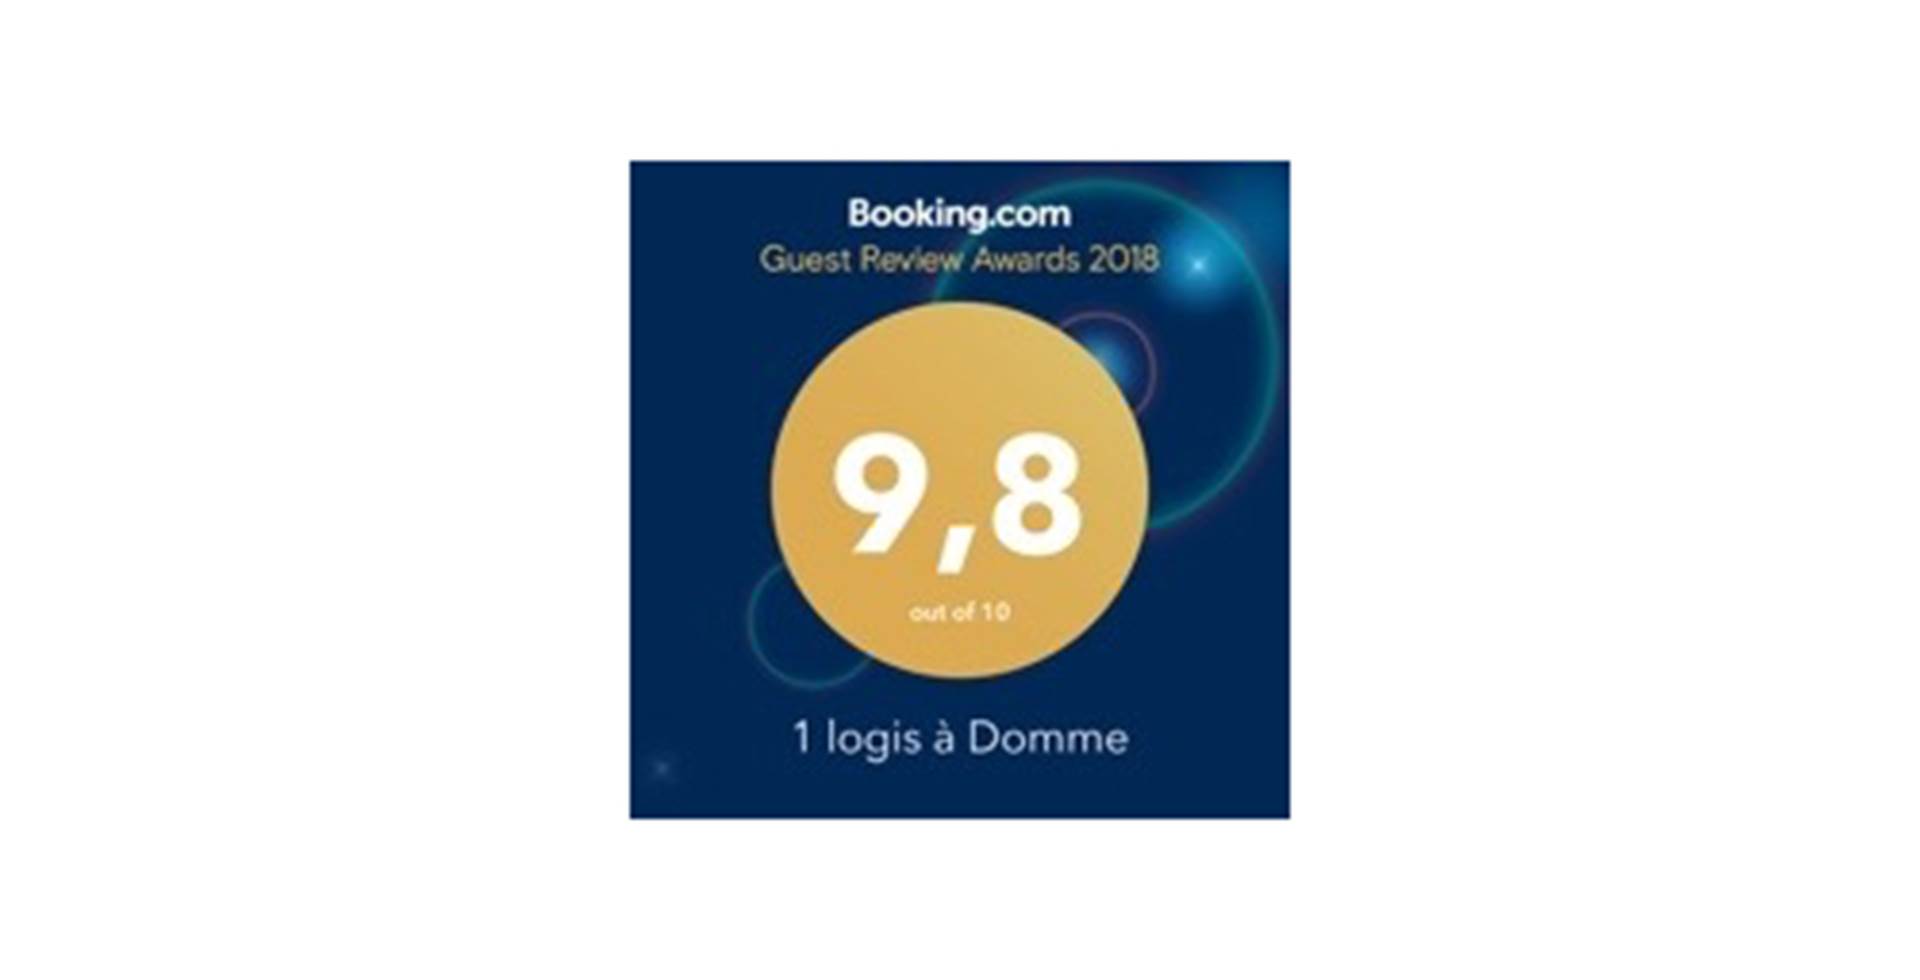 Booking.com: Guest Review Awards 2017, 2018, 2019, 2020